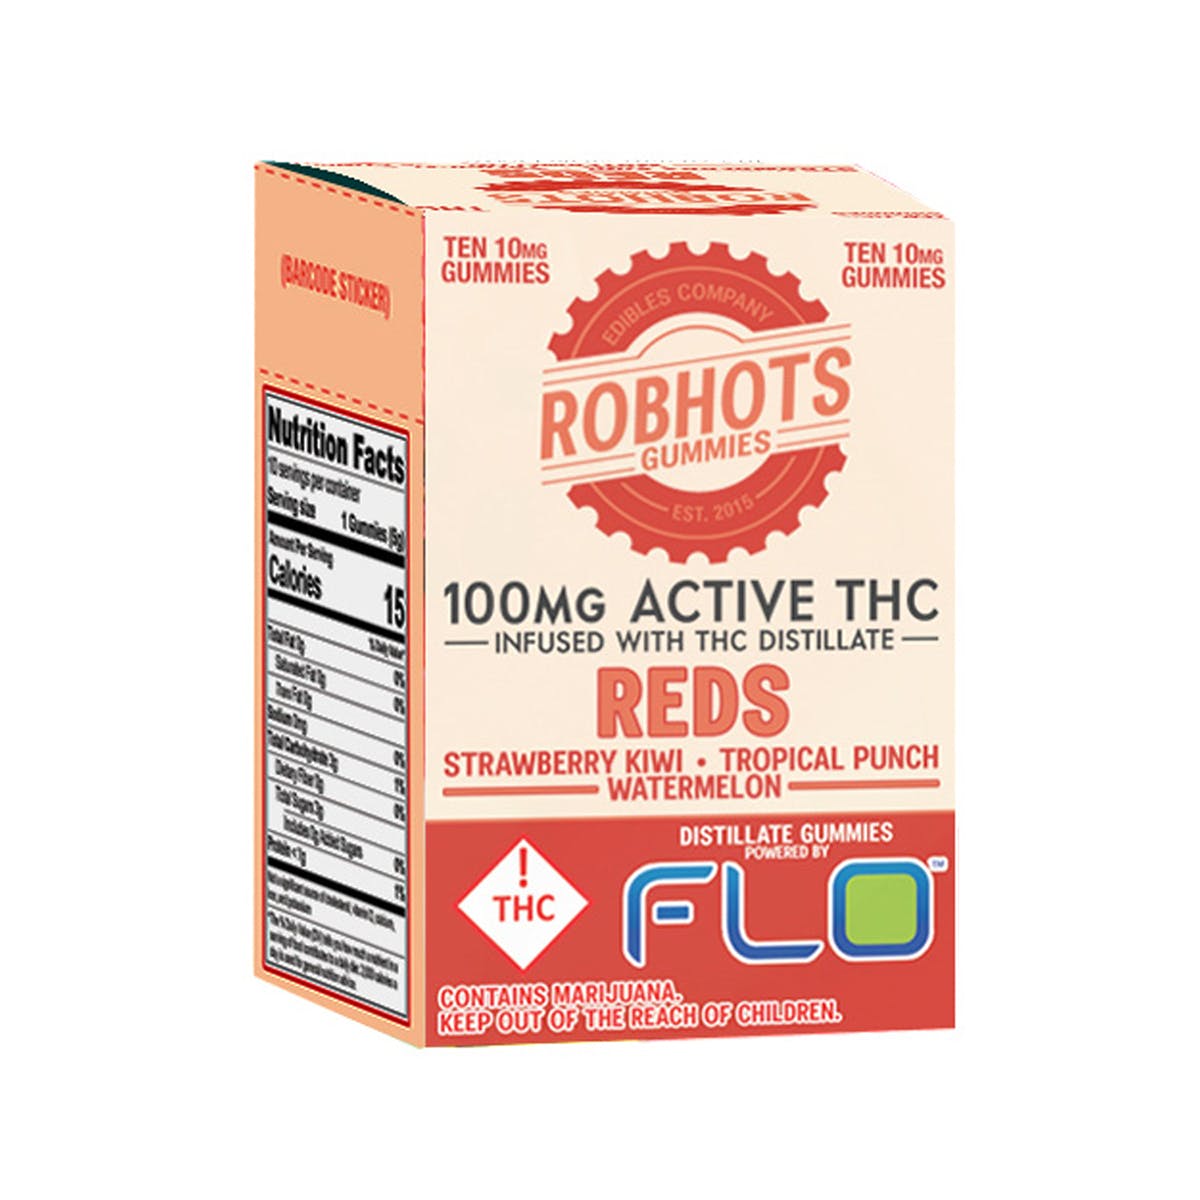 Reds 100mg Robhots Gummy Multipack (REC)